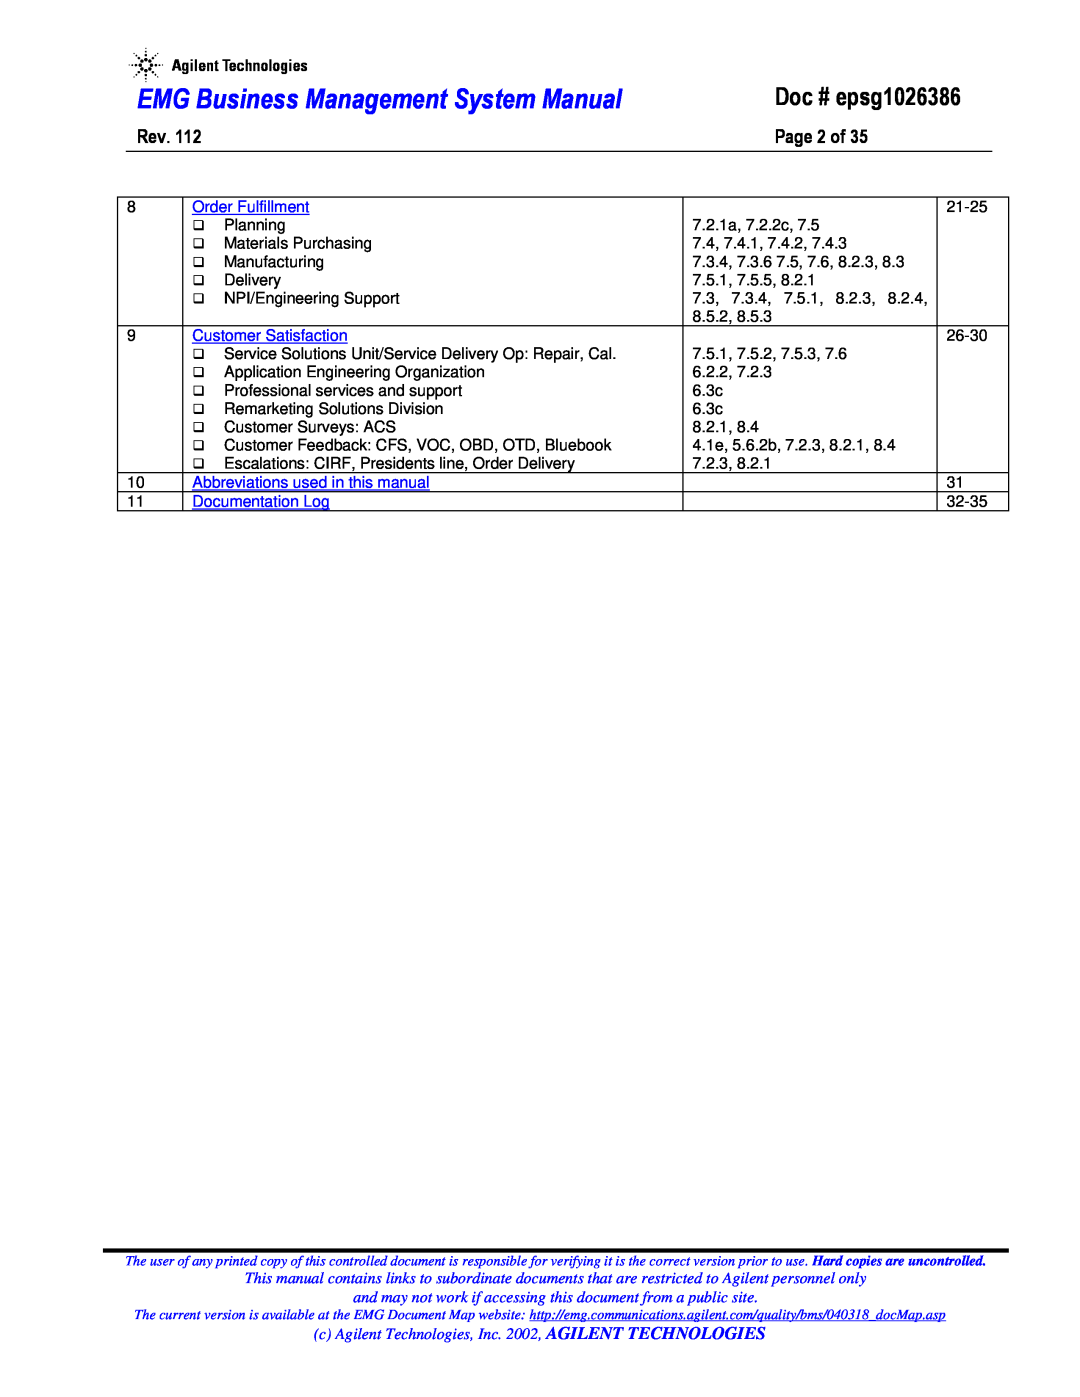 Agilent Technologies Page 2 of, EMG Business Management System Manual, Doc # epsg1026386, Order Fulfillment 